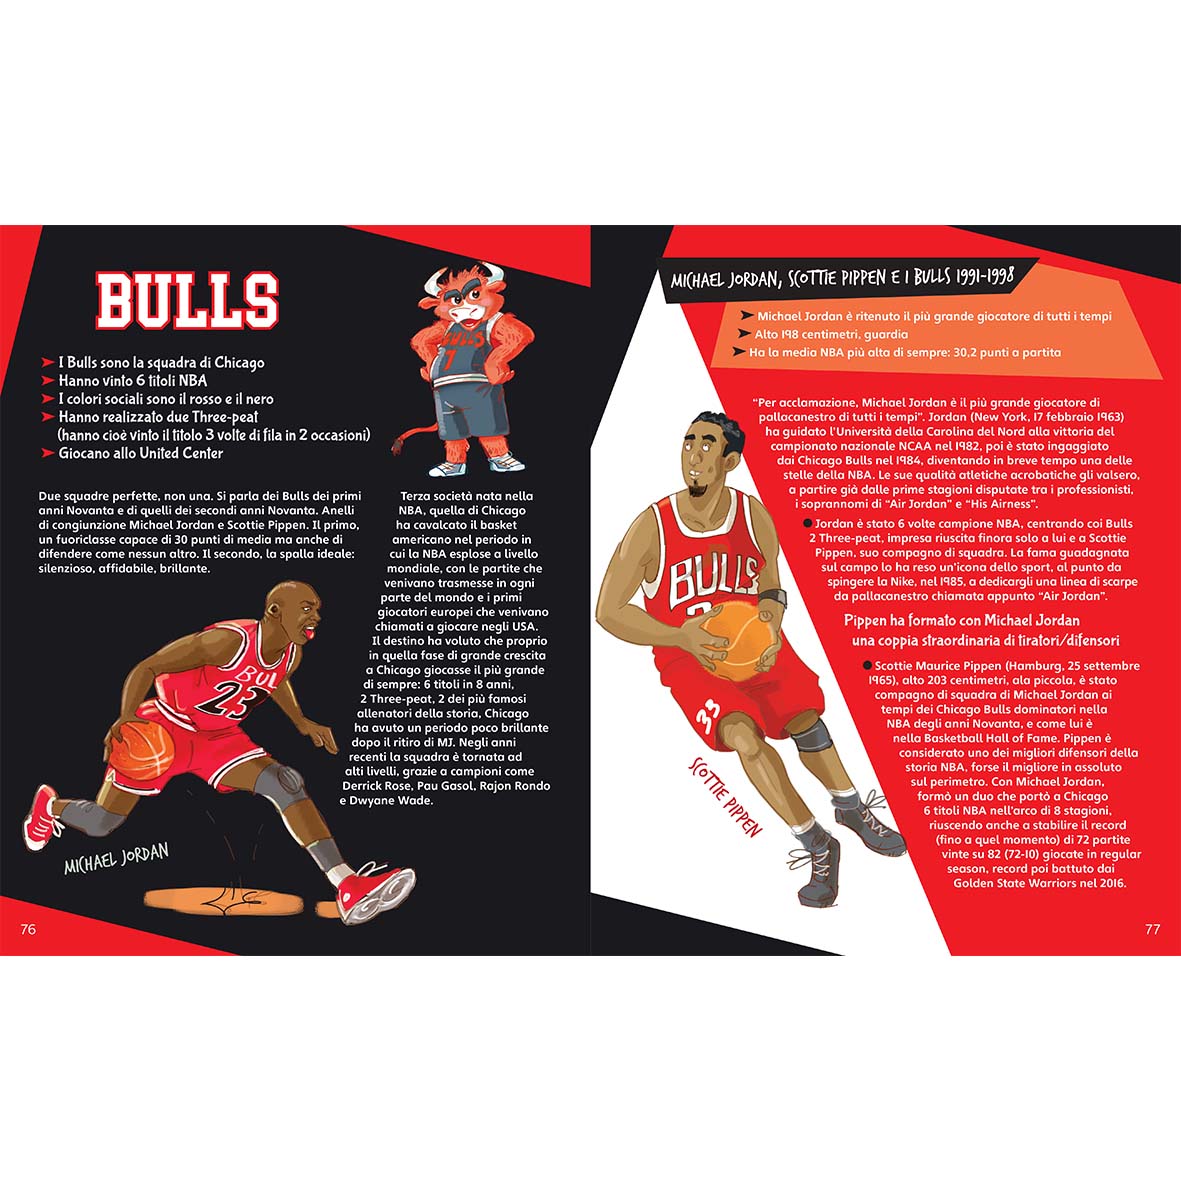 Basketball explained to children - small illustrated guide (new updated edition)